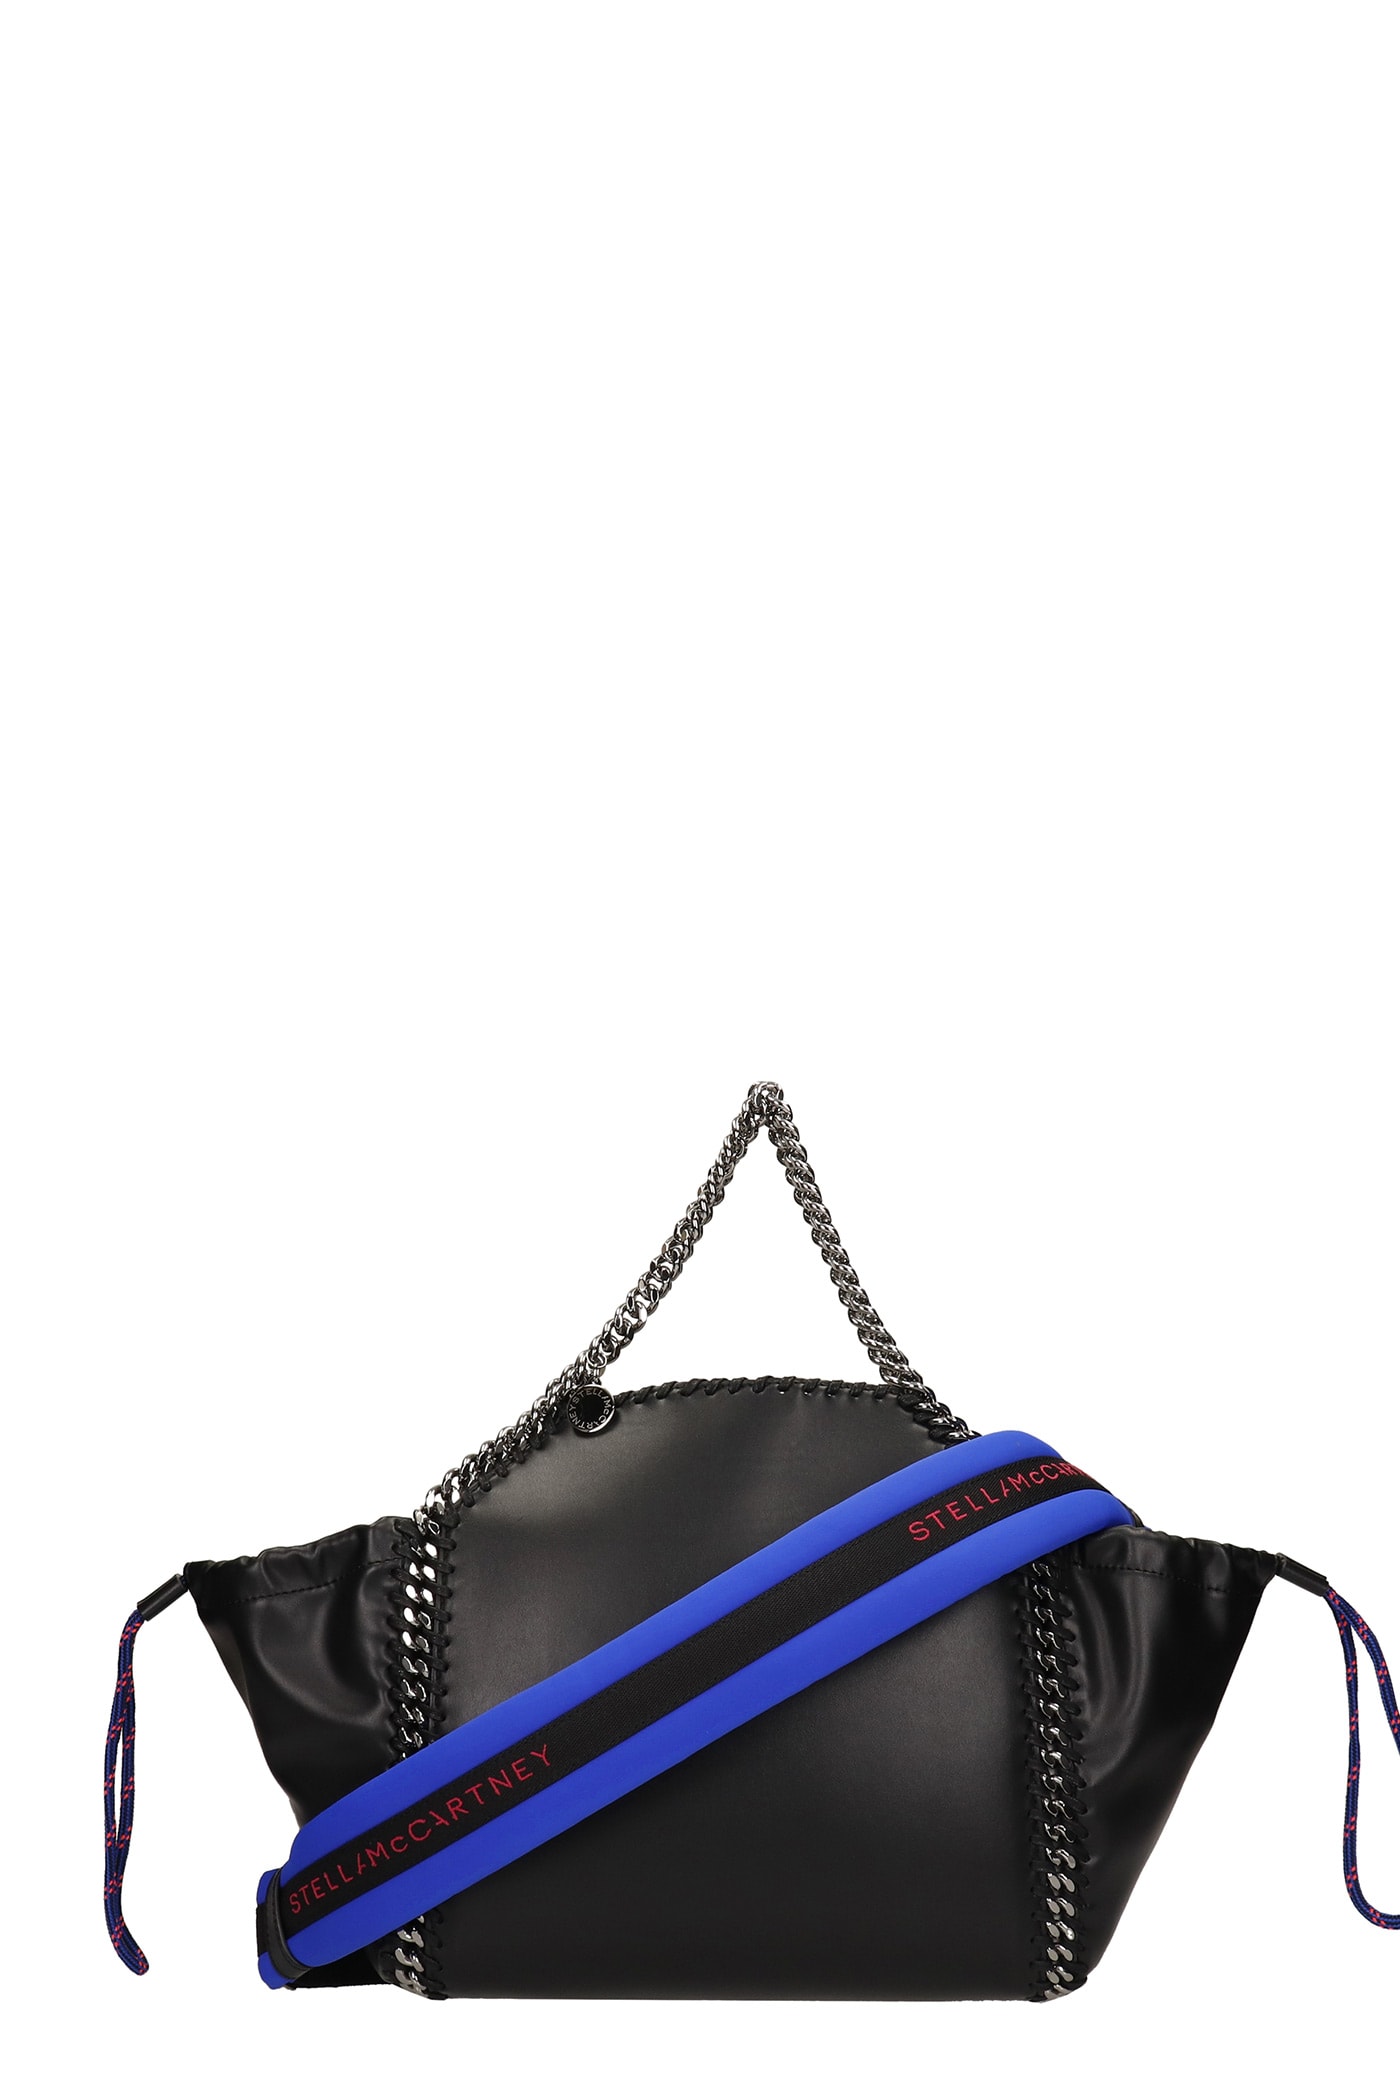 Stella McCartney Alter Mat Tote In Black Faux Leather